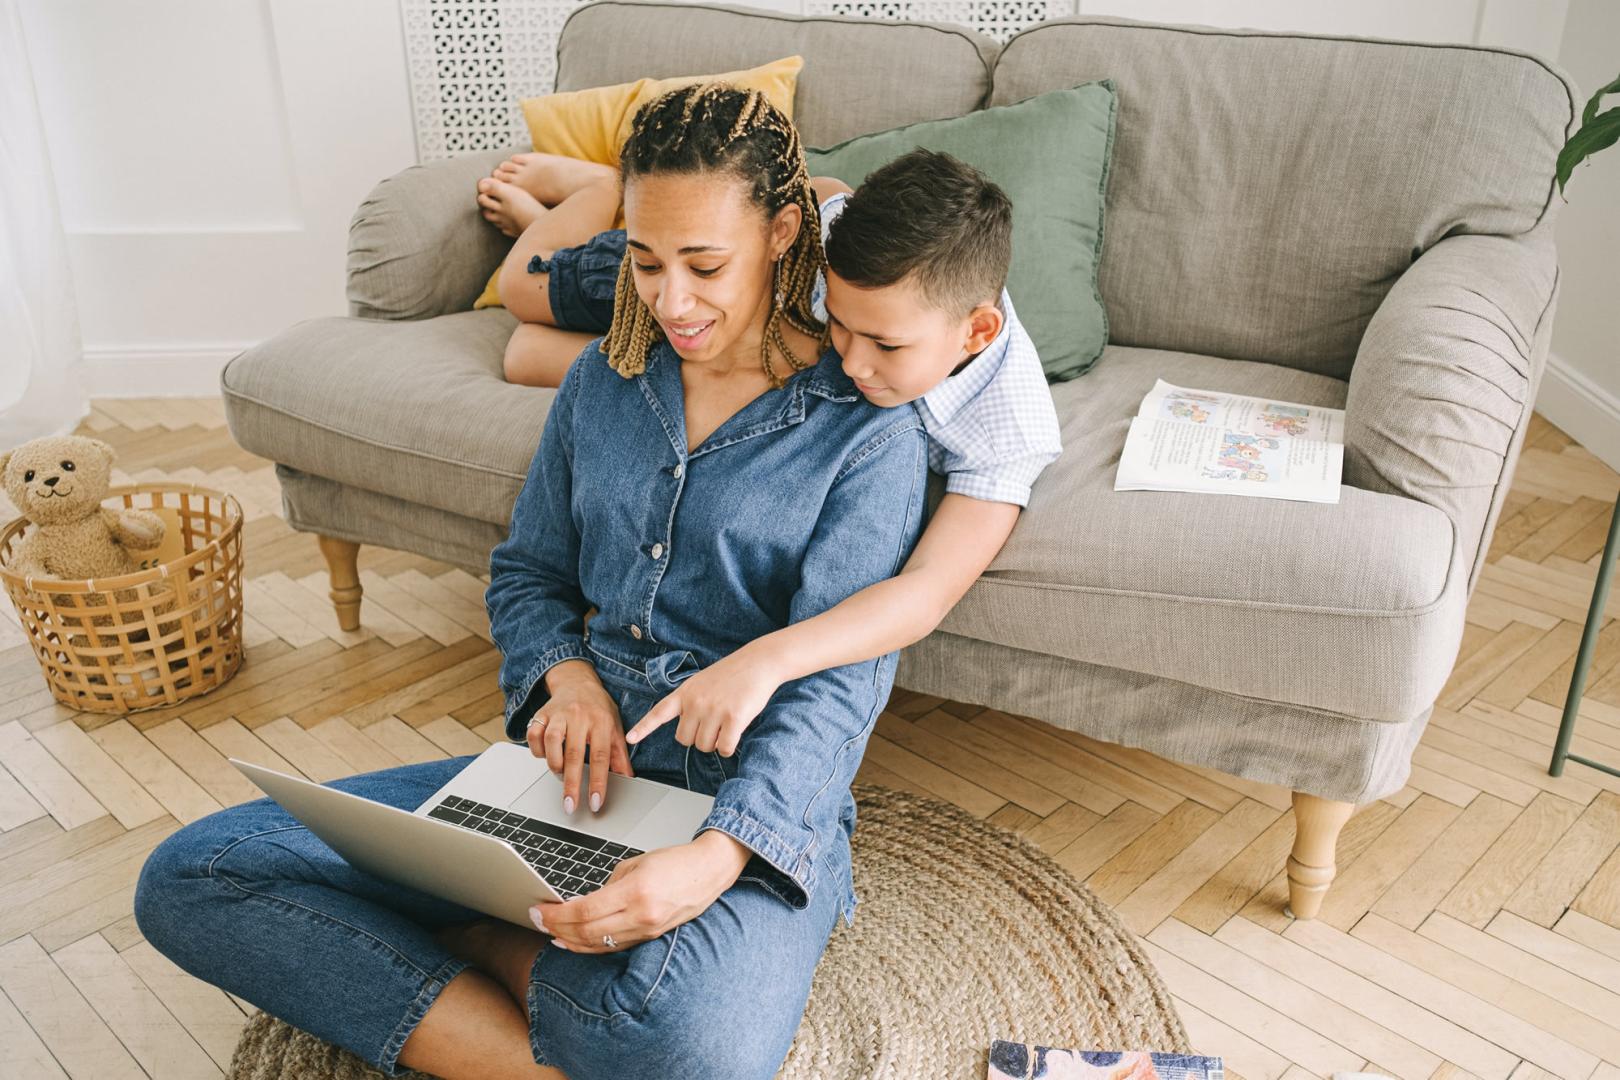 Woman with son looking at computer